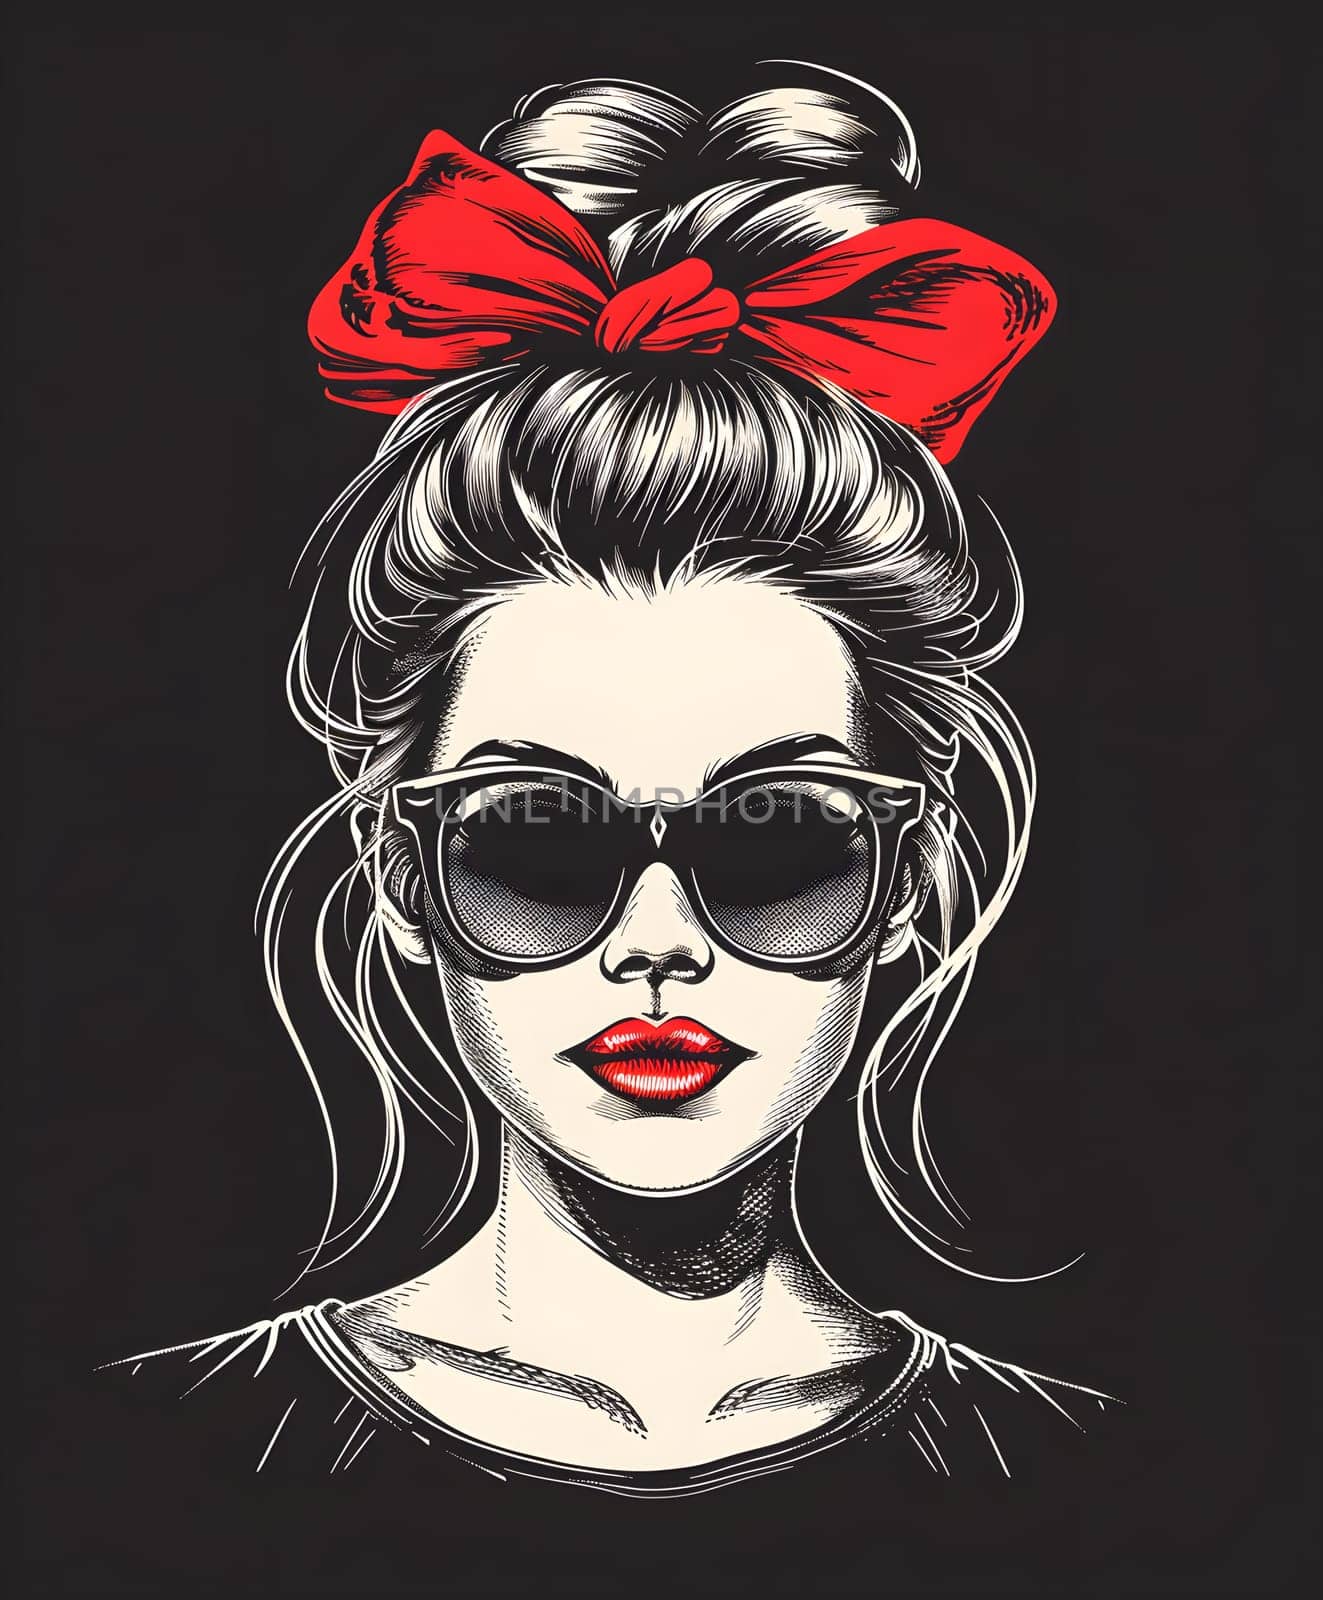 The woman stylishly donned sunglasses, with a vibrant red bow adorning her hair. Her chic look was reminiscent of a painting, with attention drawn to her head and vision care